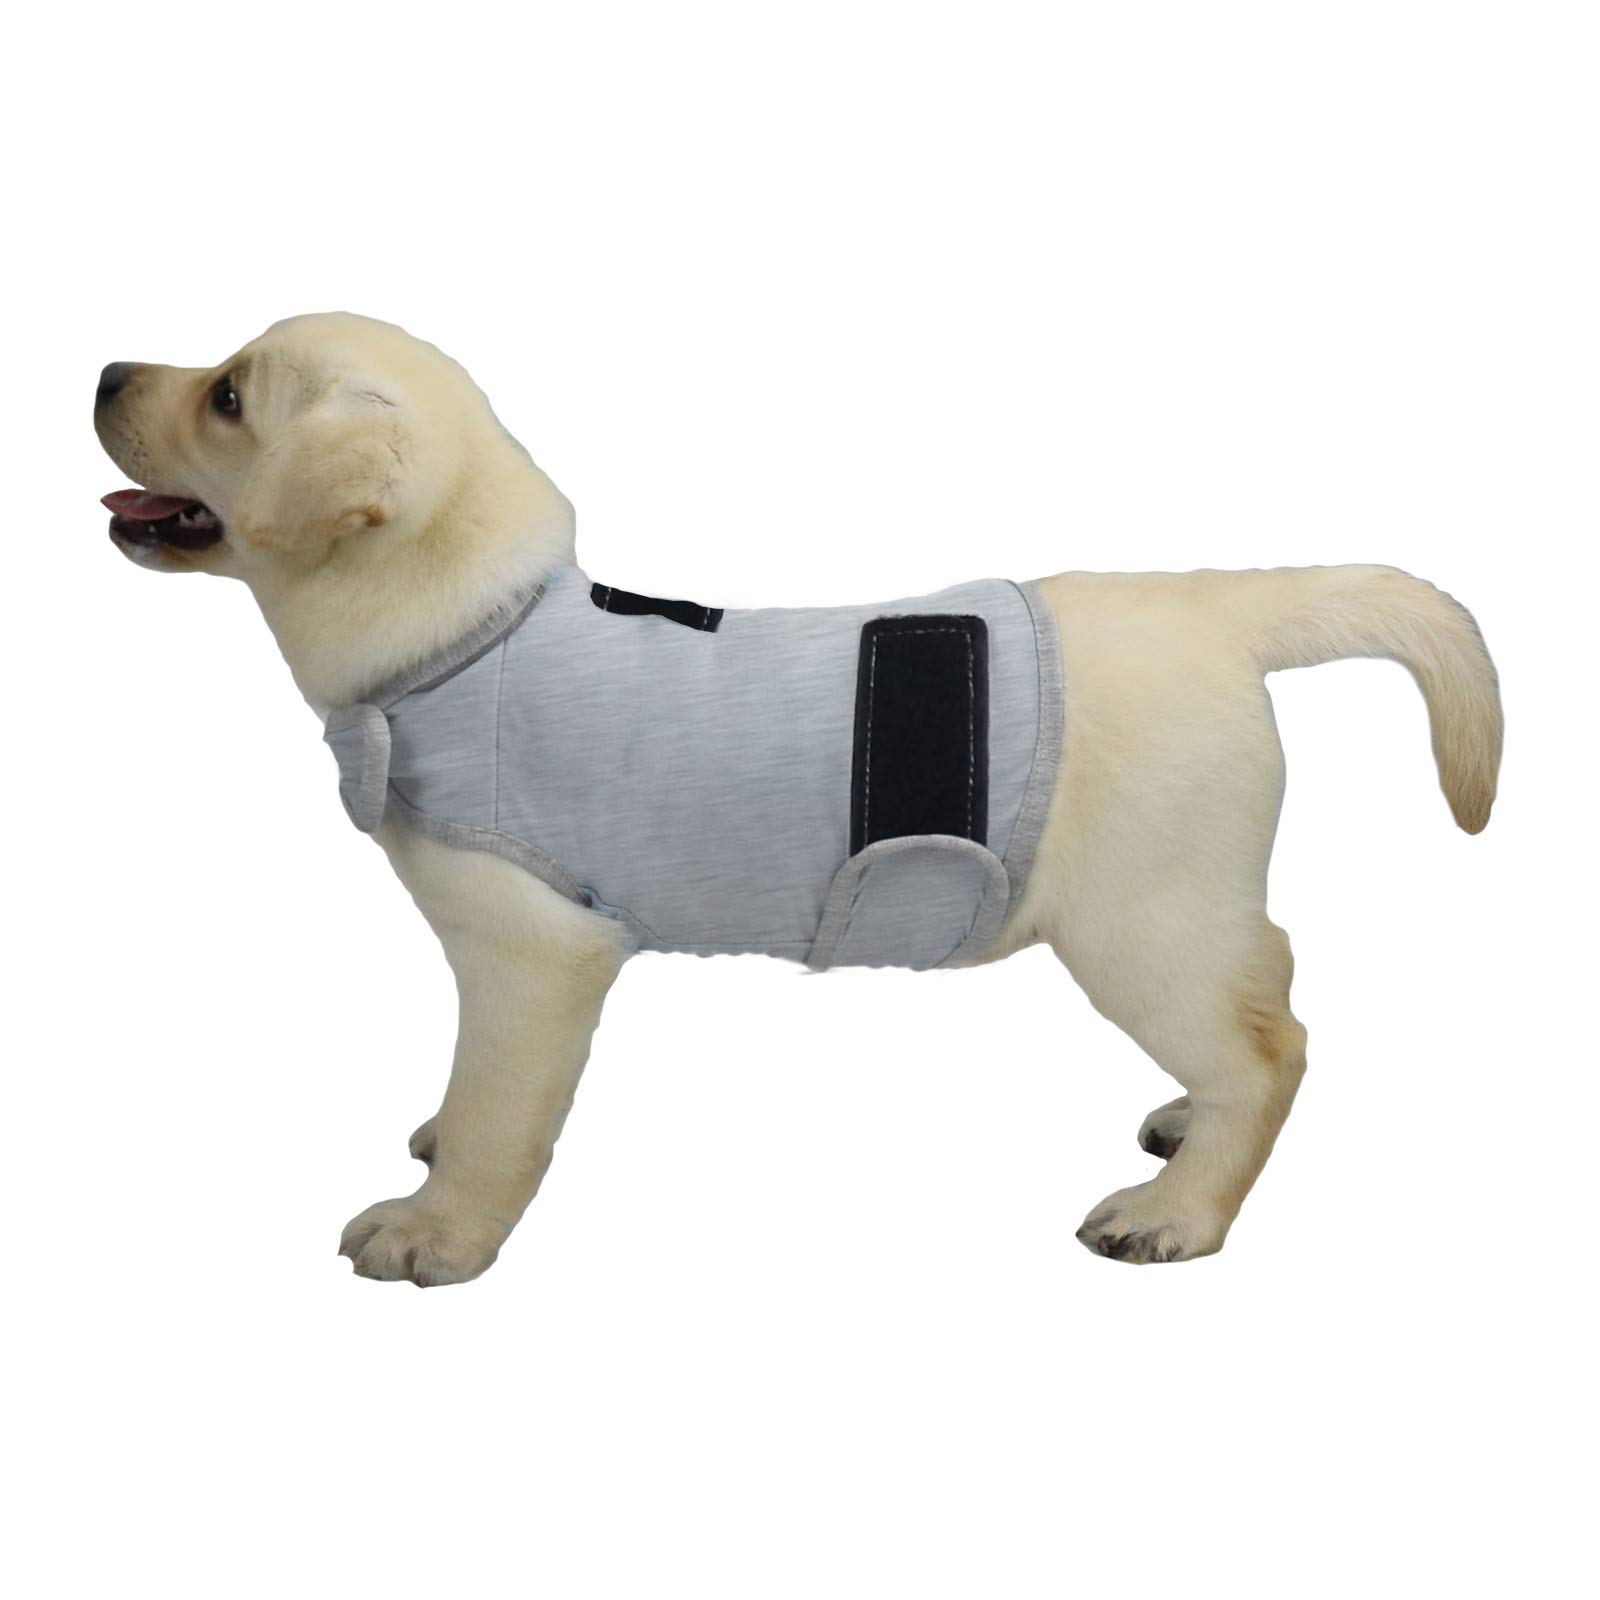 Cattamao Comfort Dog Anxiety Relief Coat, Dog Anxiety Calming Vest Wrap For Thunderstorm,Travel,Fireworks,Vet Visits,Separation